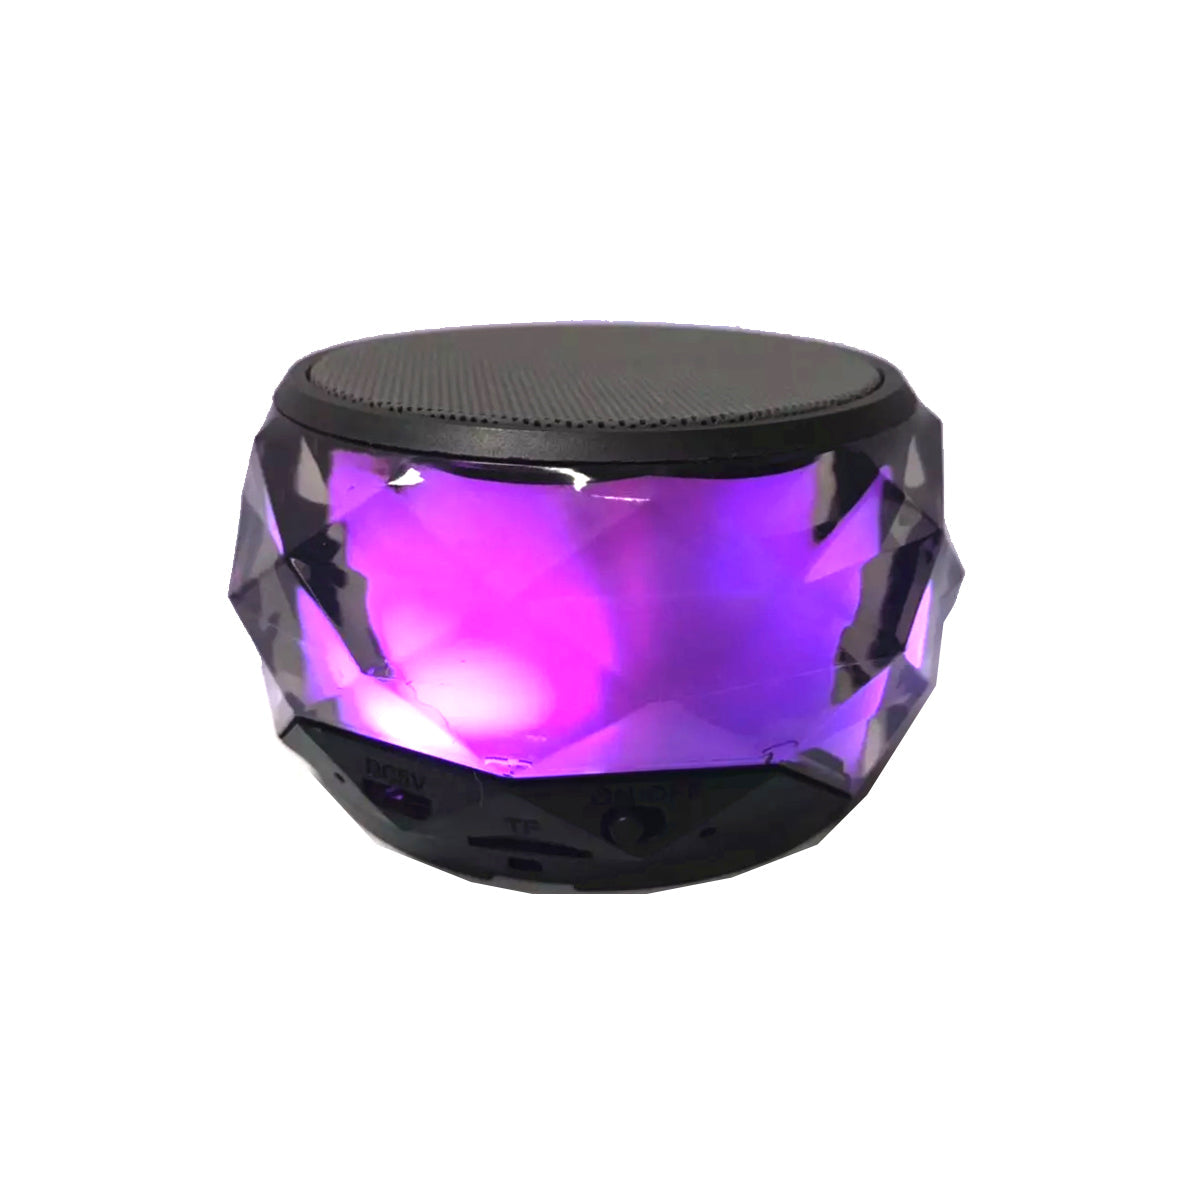 Candylight LED Stereo Bluetooth Mini Speaker And MP4 Player by VistaShops